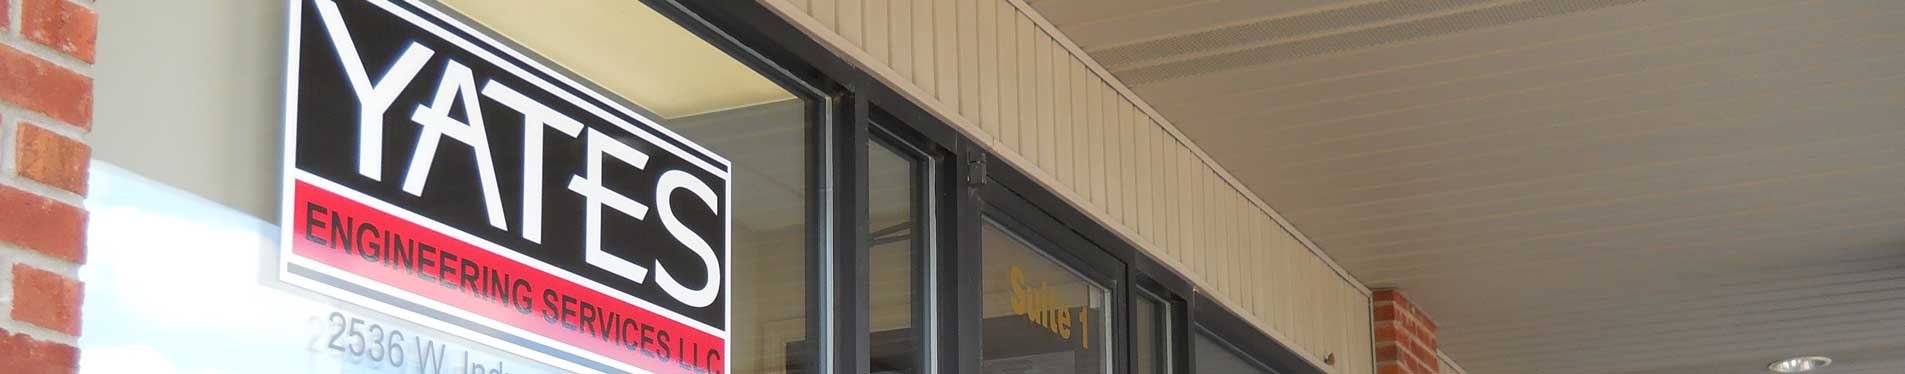 The front window and door of Yates Engineering Services